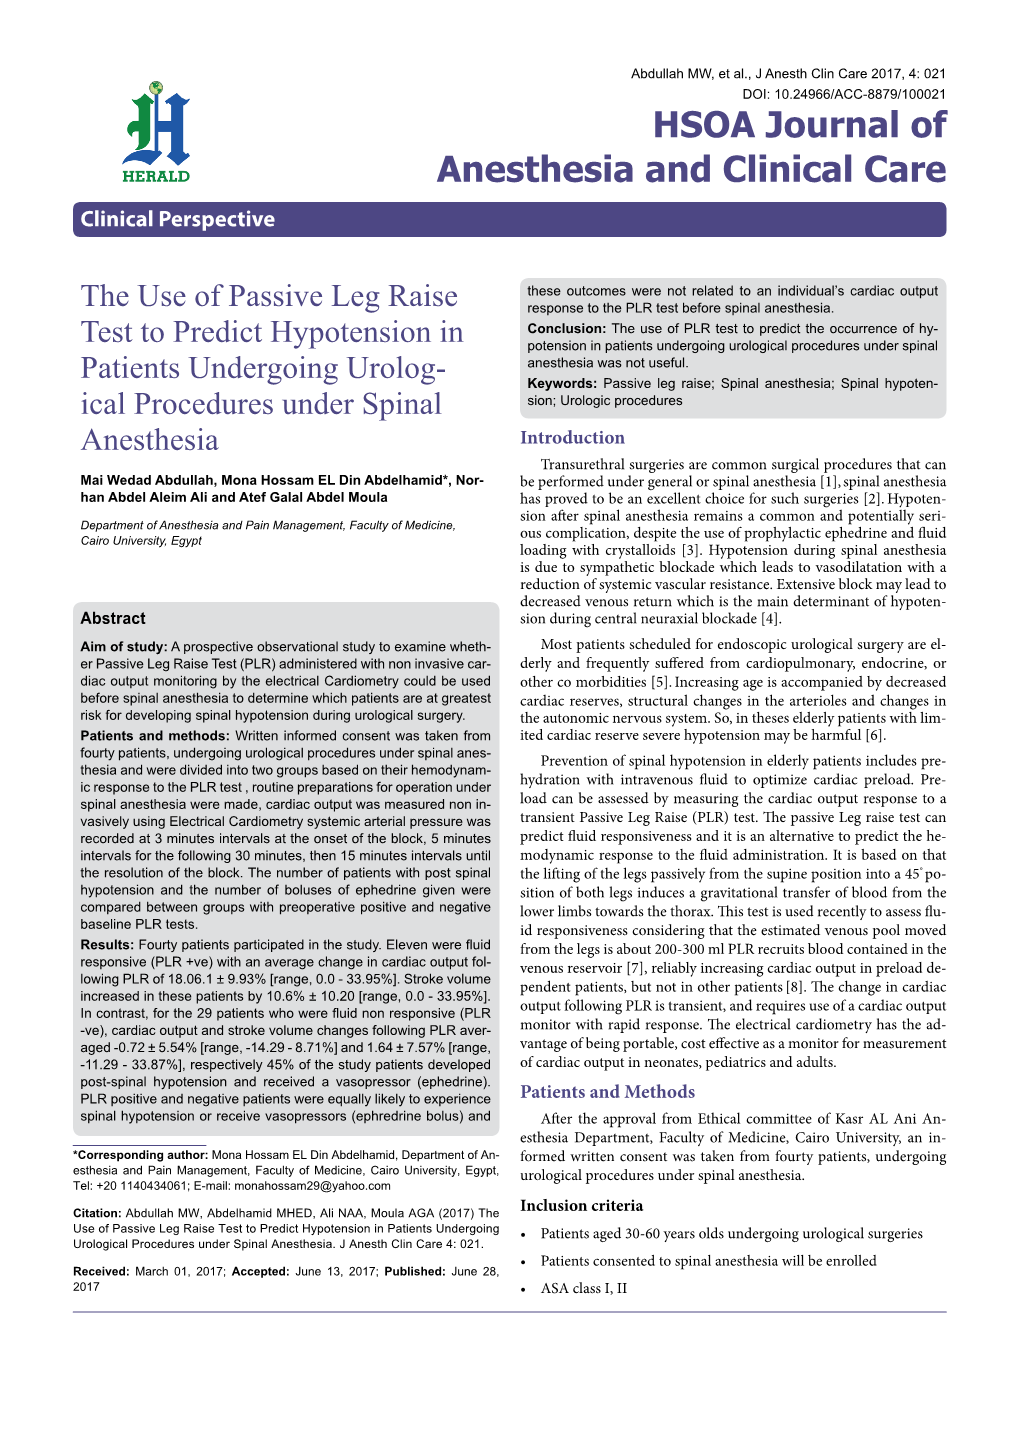 The Use of Passive Leg Raise Test to Predict Hypotension in Patients Undergoing Urological Procedures Under Spinal Anesthesia